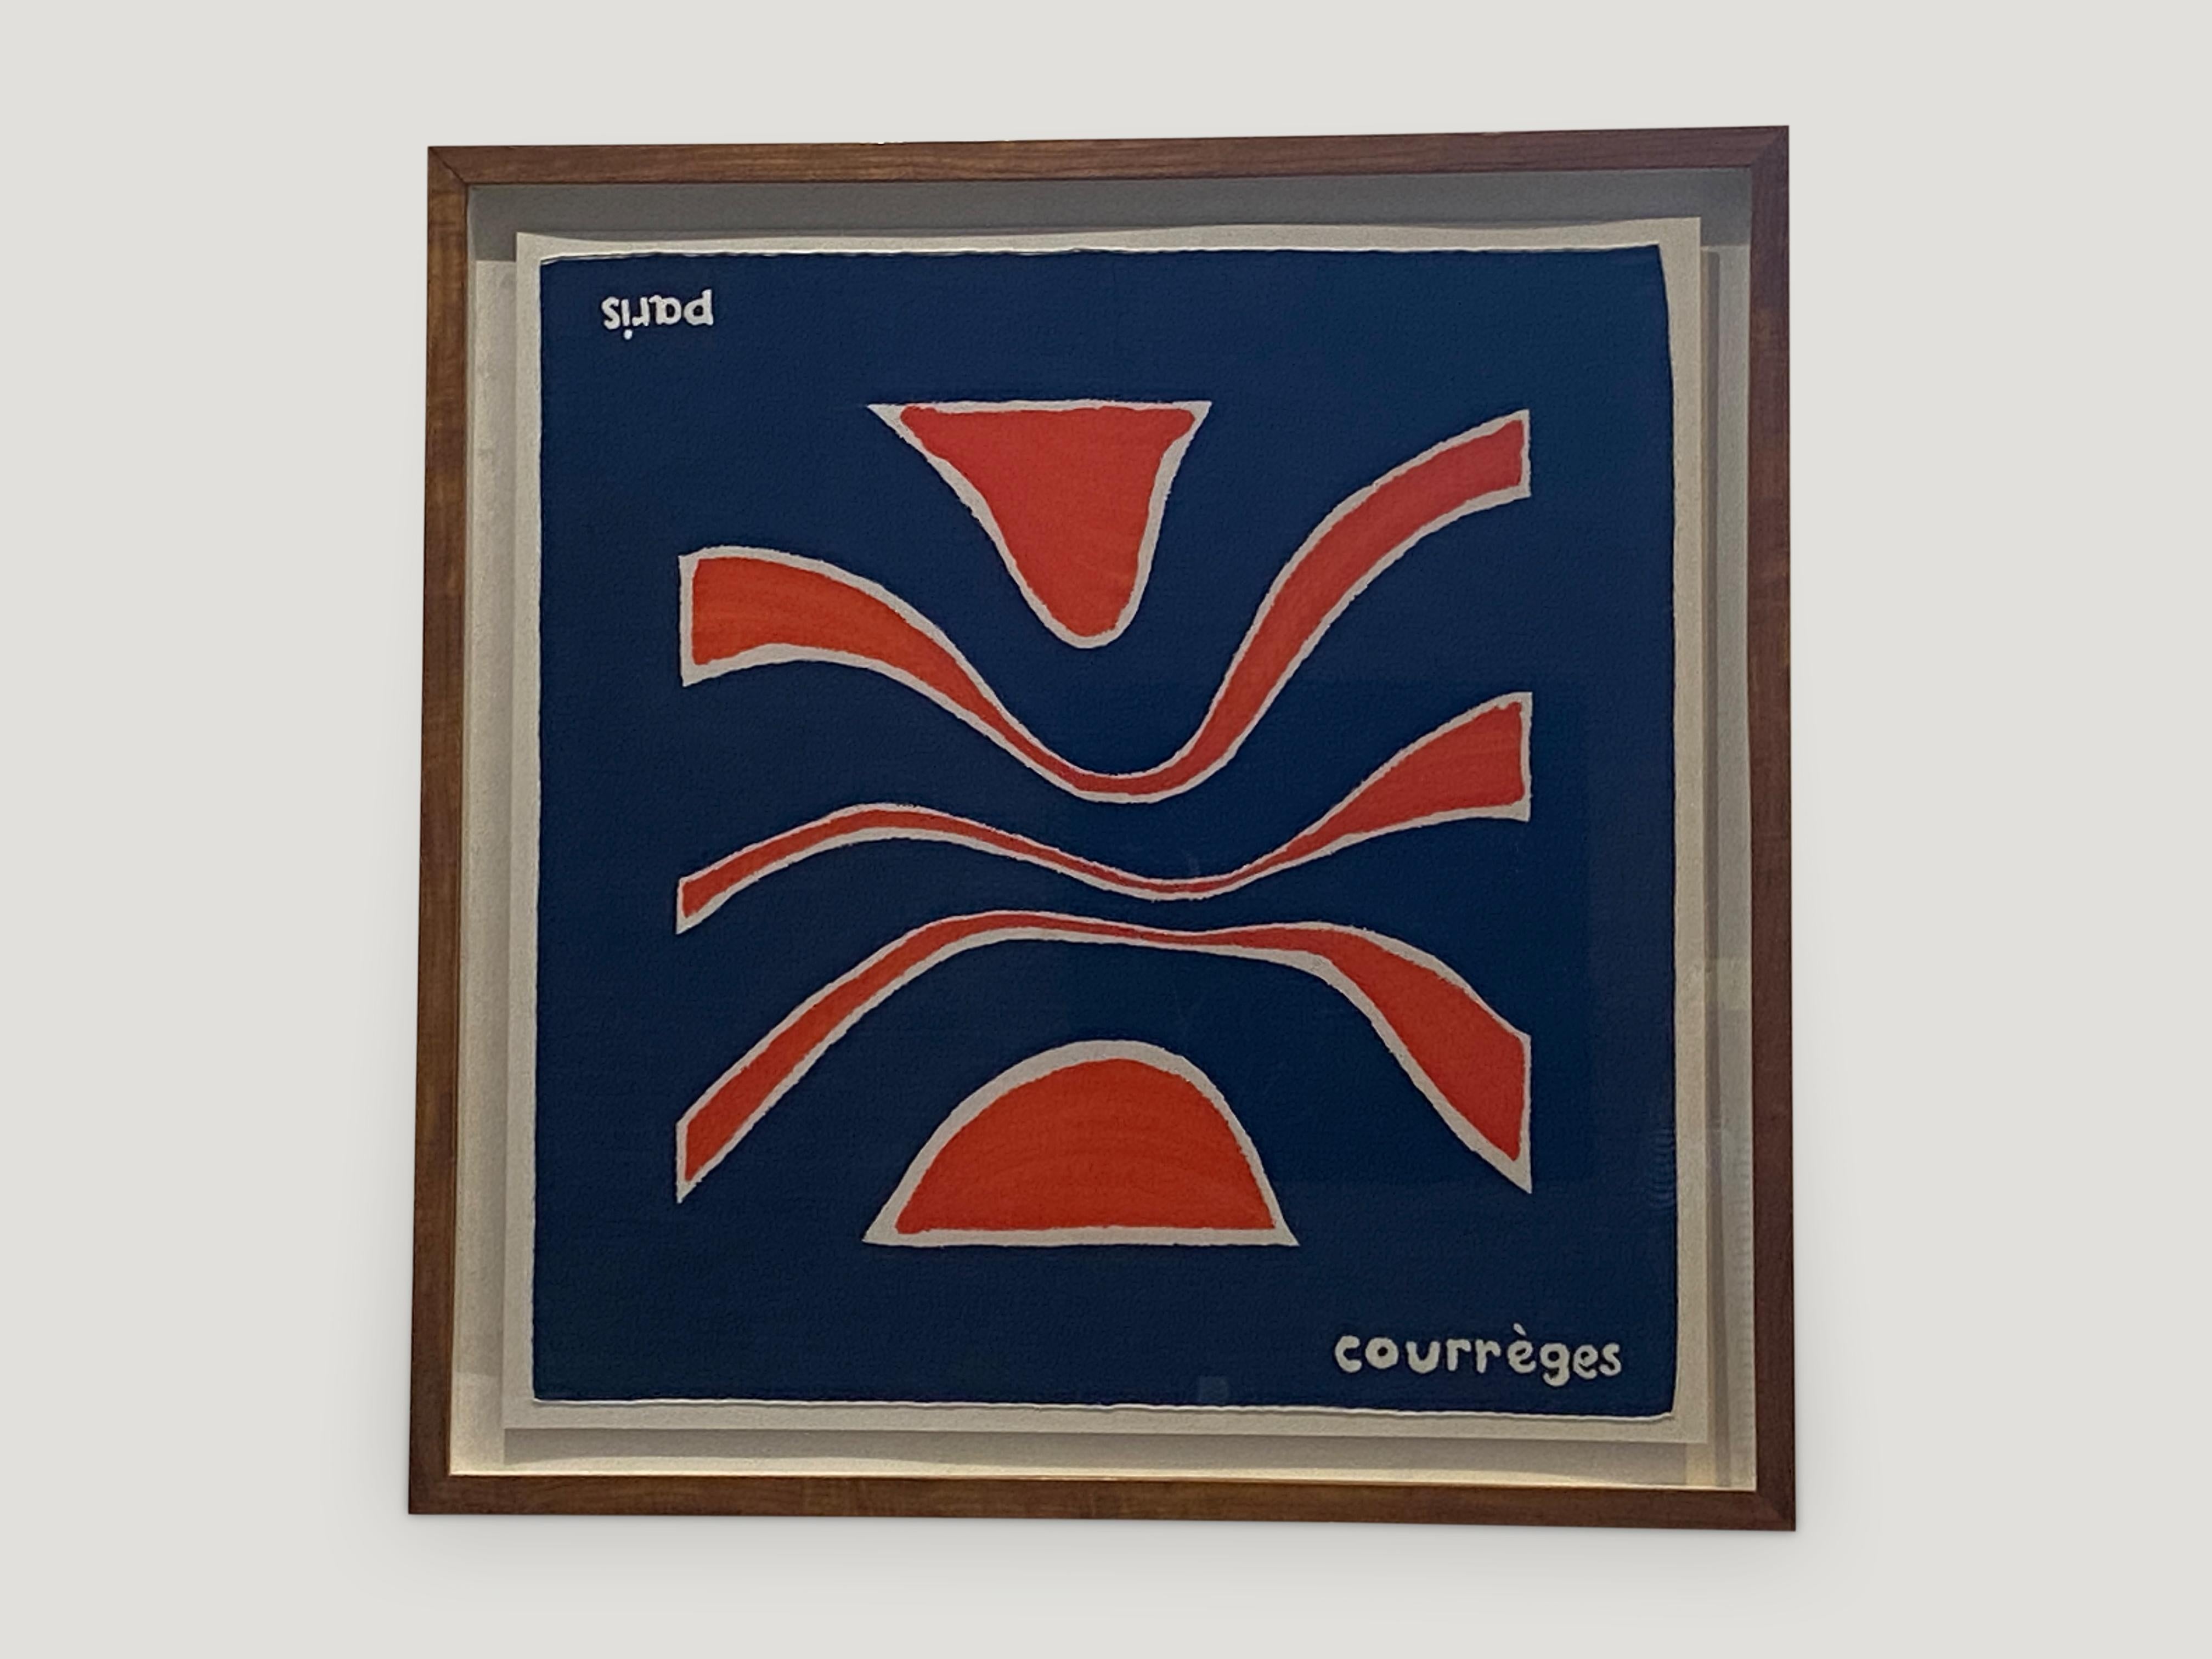 Rare, vintage Courrèges silk scarf in excellent condition found in Paris, France. Features bold contrasting colors in this beautiful abstract silk vintage scarf from Courreges. Set in a modern natural teak box frame.

Andrianna Shamaris. The